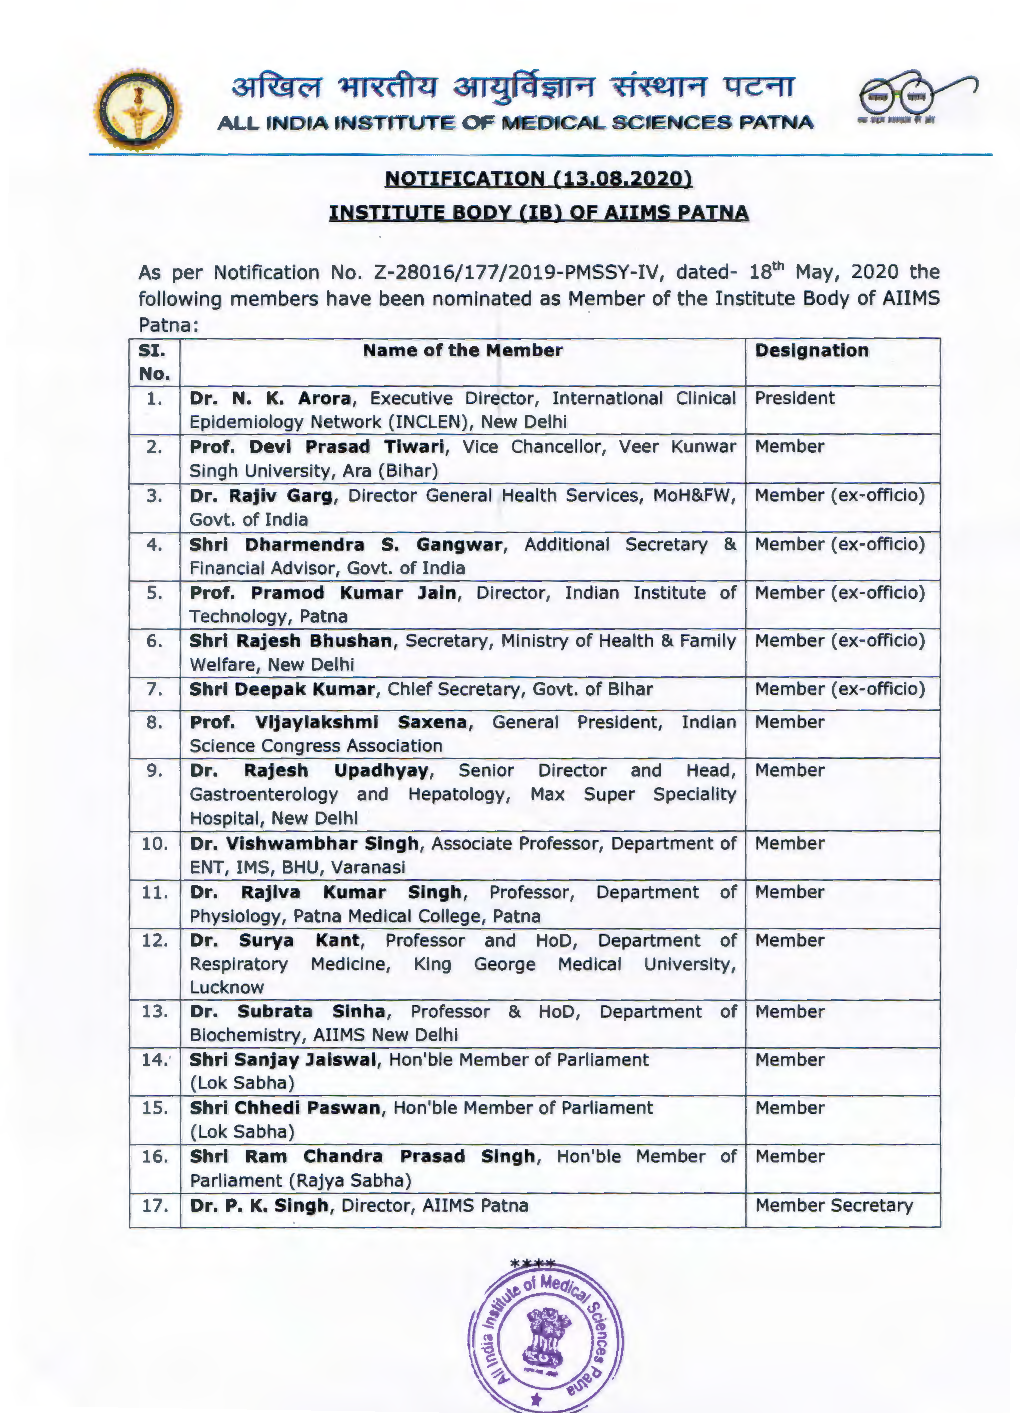 Notification for List of Members of Institute Body AIIMS